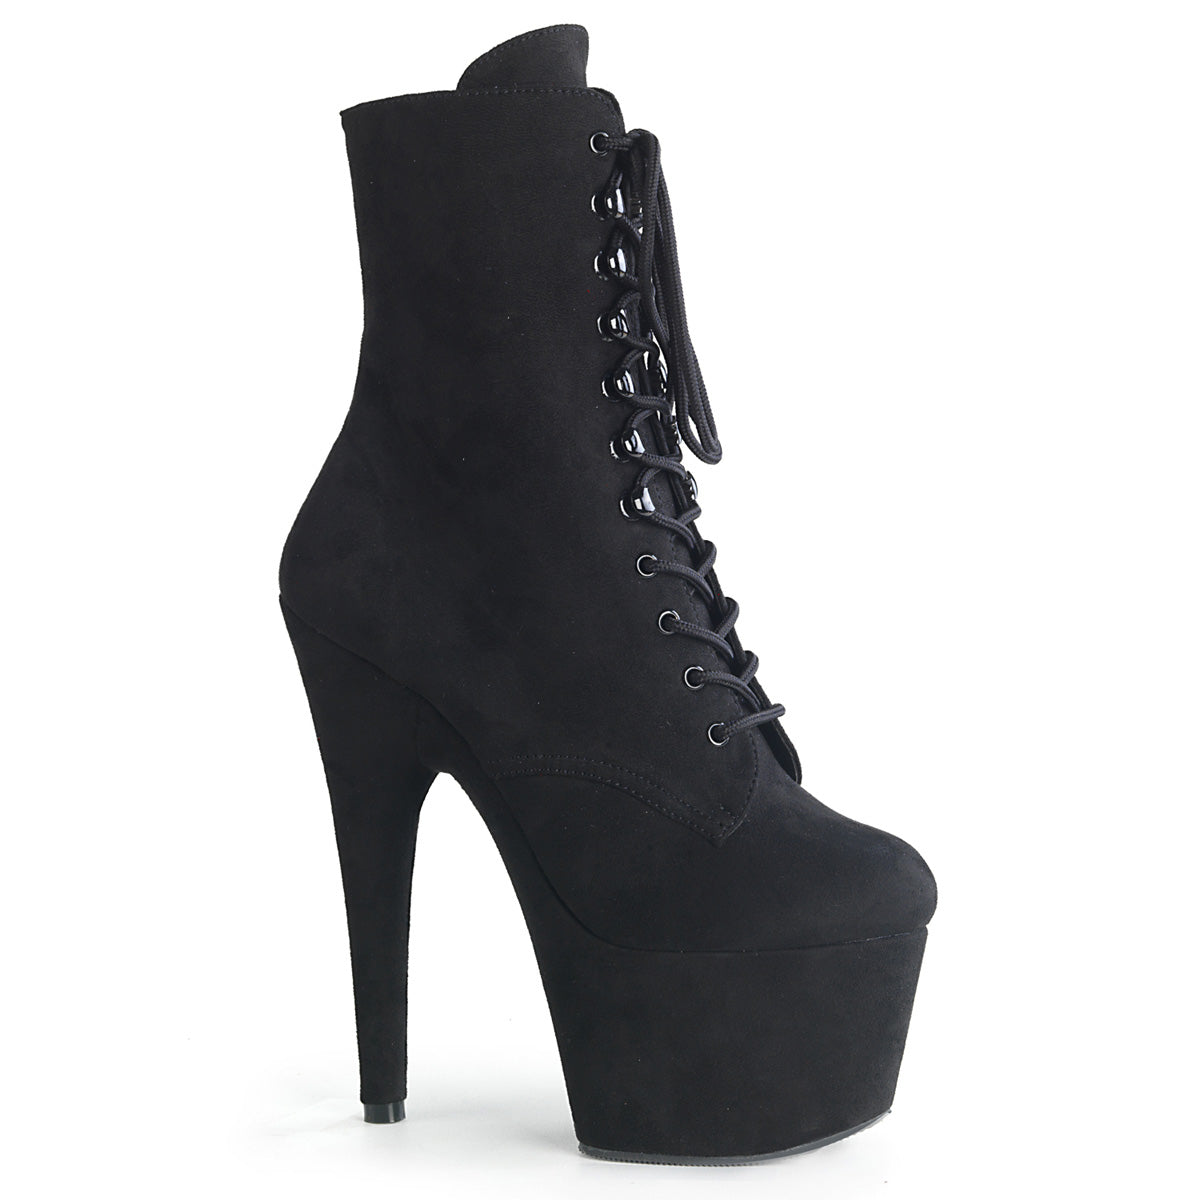 ADORE-1020FS Black Suede Lace Up Ankle Boots